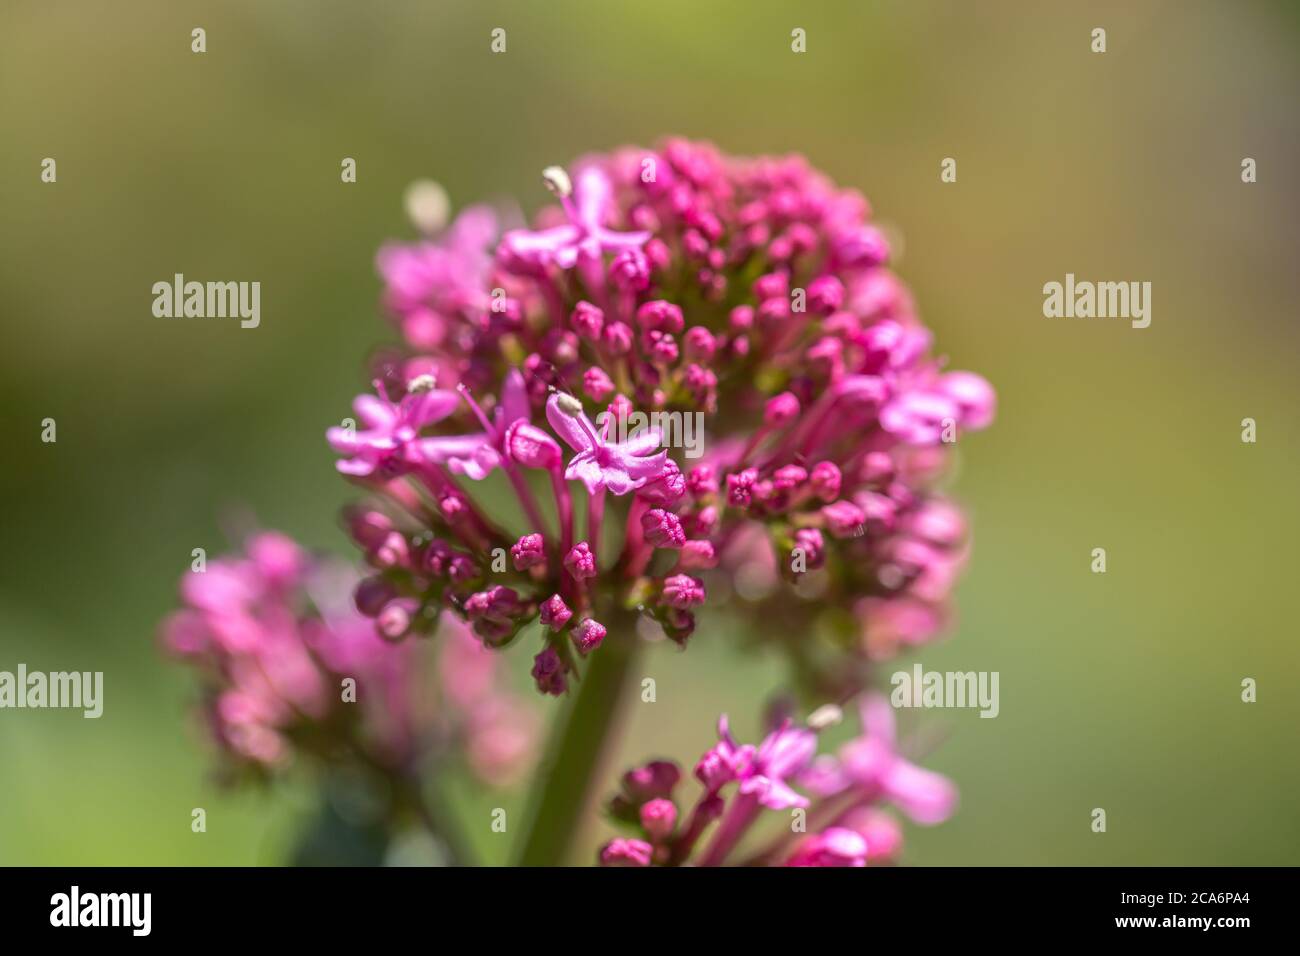 A close up red valerian flowers, with a shallow depth of field Stock Photo